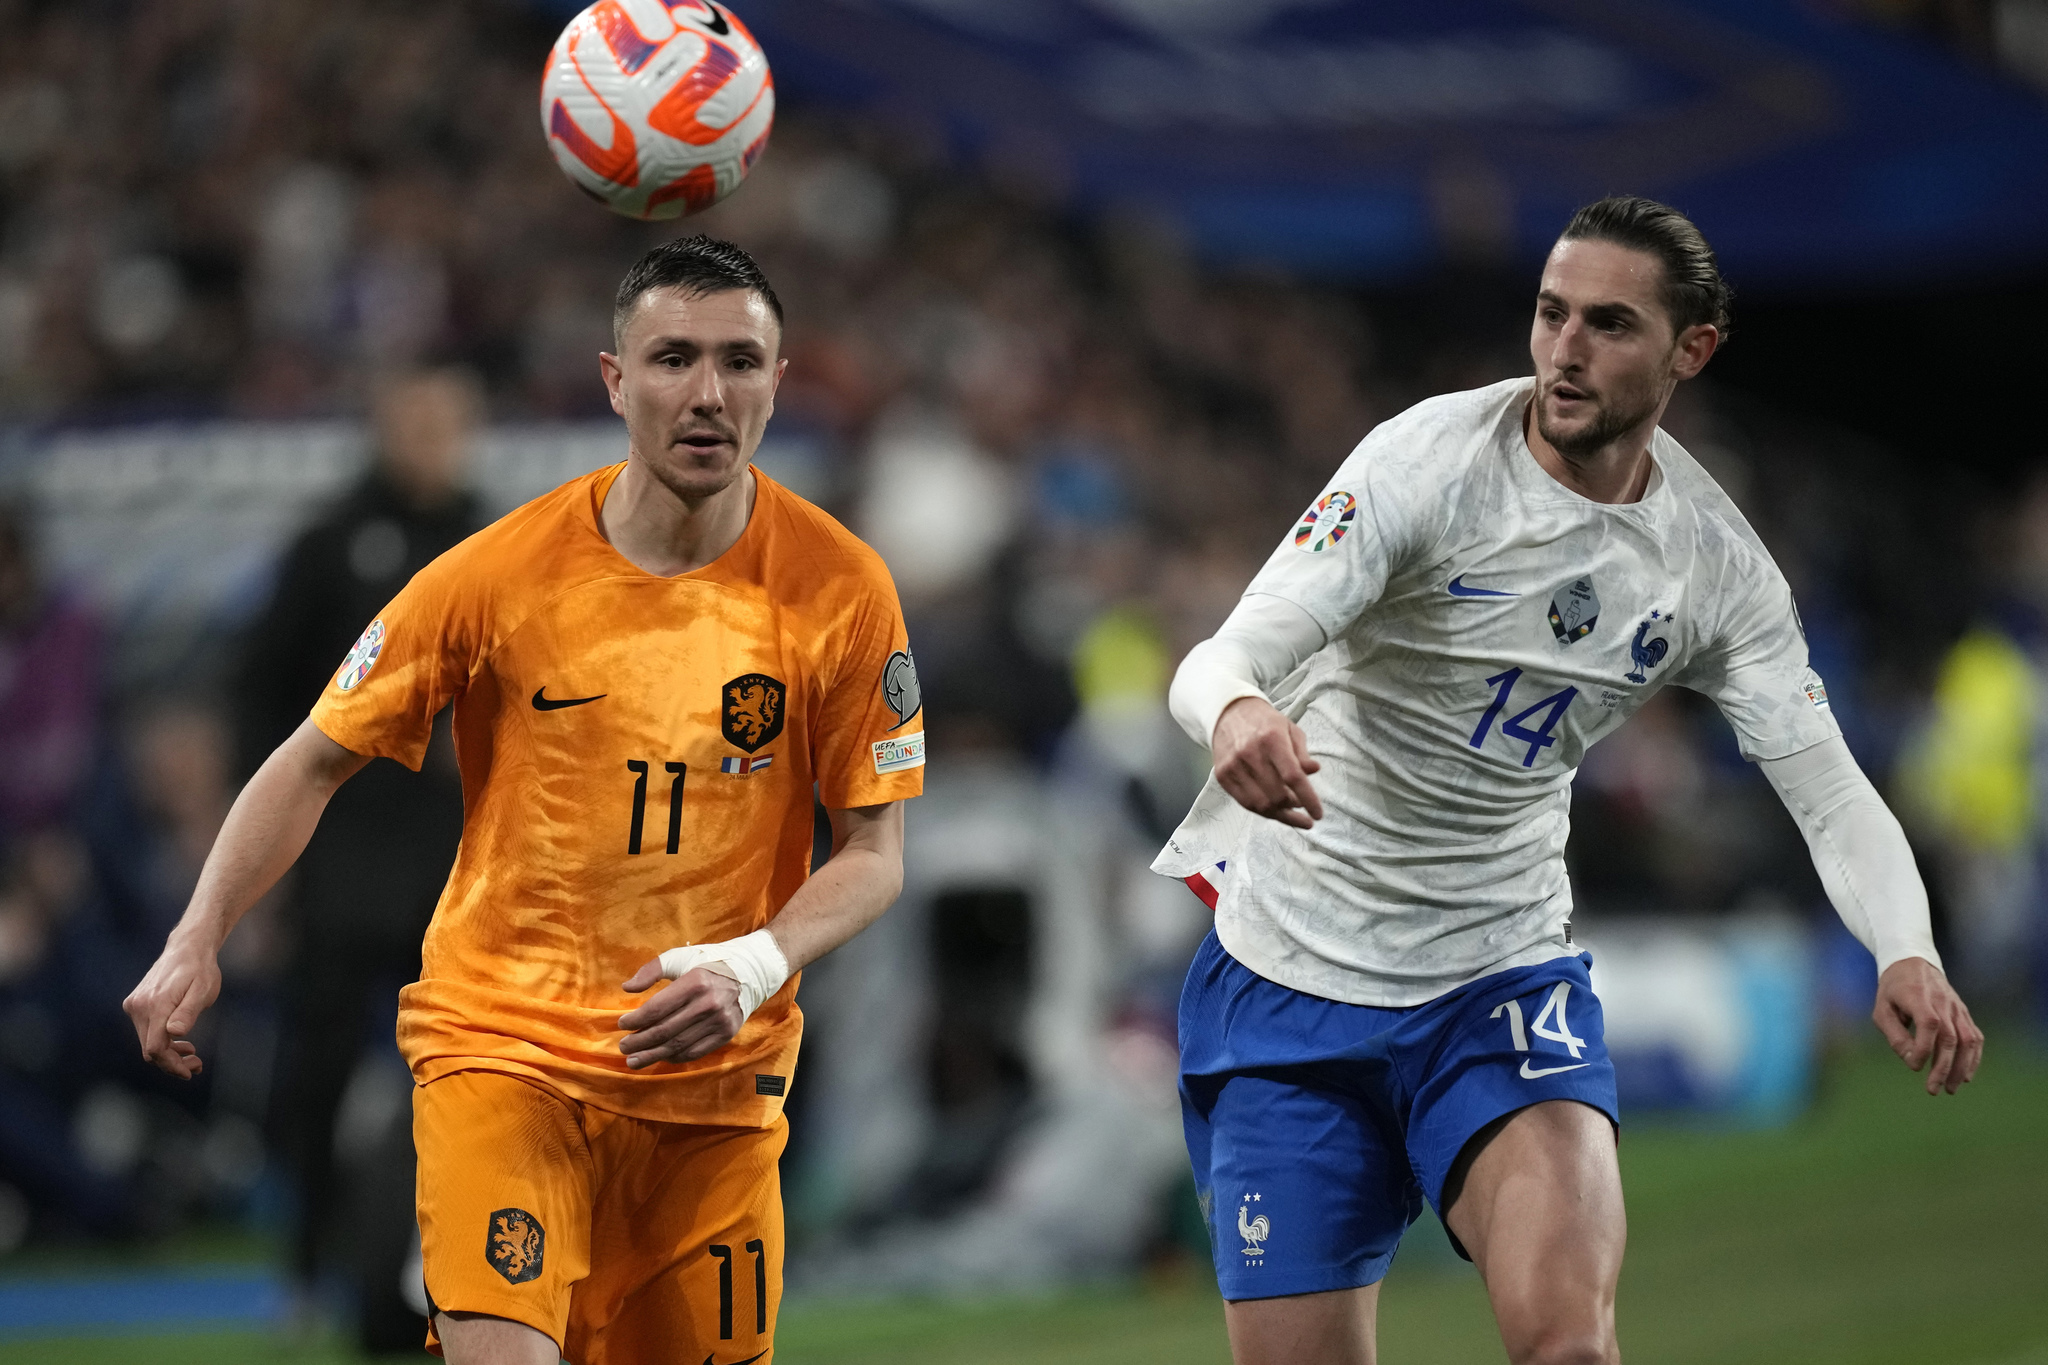 Netherlands' Steven Berghuis, left, challenges for the ball with  lt;HIT gt;France lt;/HIT gt;'s Adrien Rabiot during the Euro 2024 group B qualifying soccer match between  lt;HIT gt;France lt;/HIT gt; and the Netherlands at the Stade de  lt;HIT gt;France lt;/HIT gt; in Saint Denis, outside Paris,  lt;HIT gt;France lt;/HIT gt;, Friday, March 24, 2023. (AP Photo/Christophe Ena)